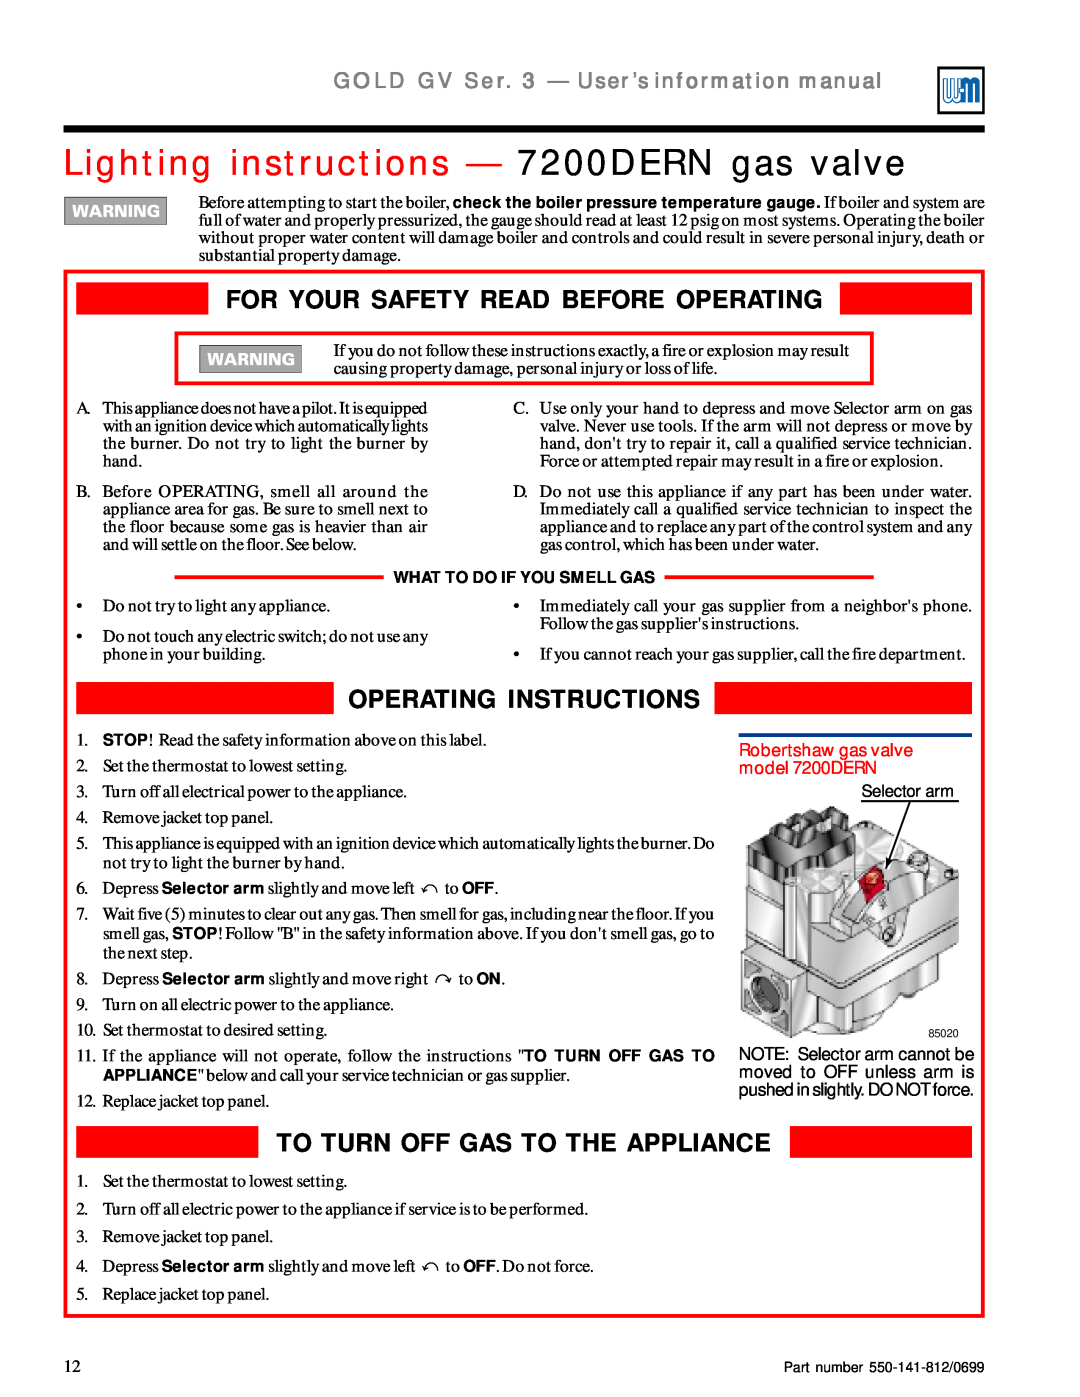 Weil-McLain 3 Series manual Lighting instructions — 7200DERN gas valve, For Your Safety Read Before Operating 